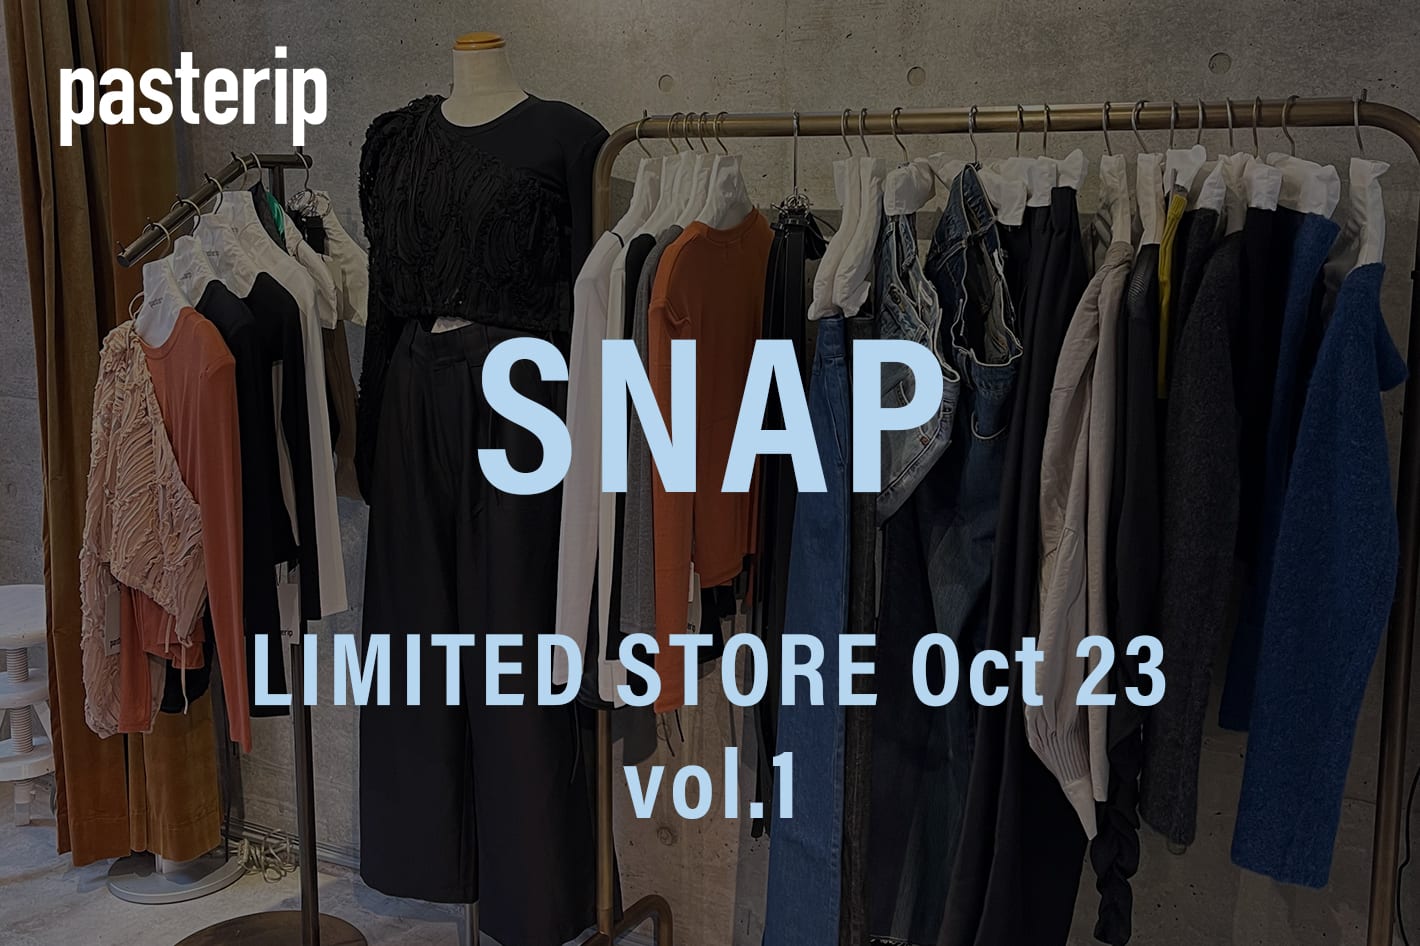 Pasterip SNAP 【LIMITED STORE Oct23 vol.1】 | Pasterip(パセリ)の